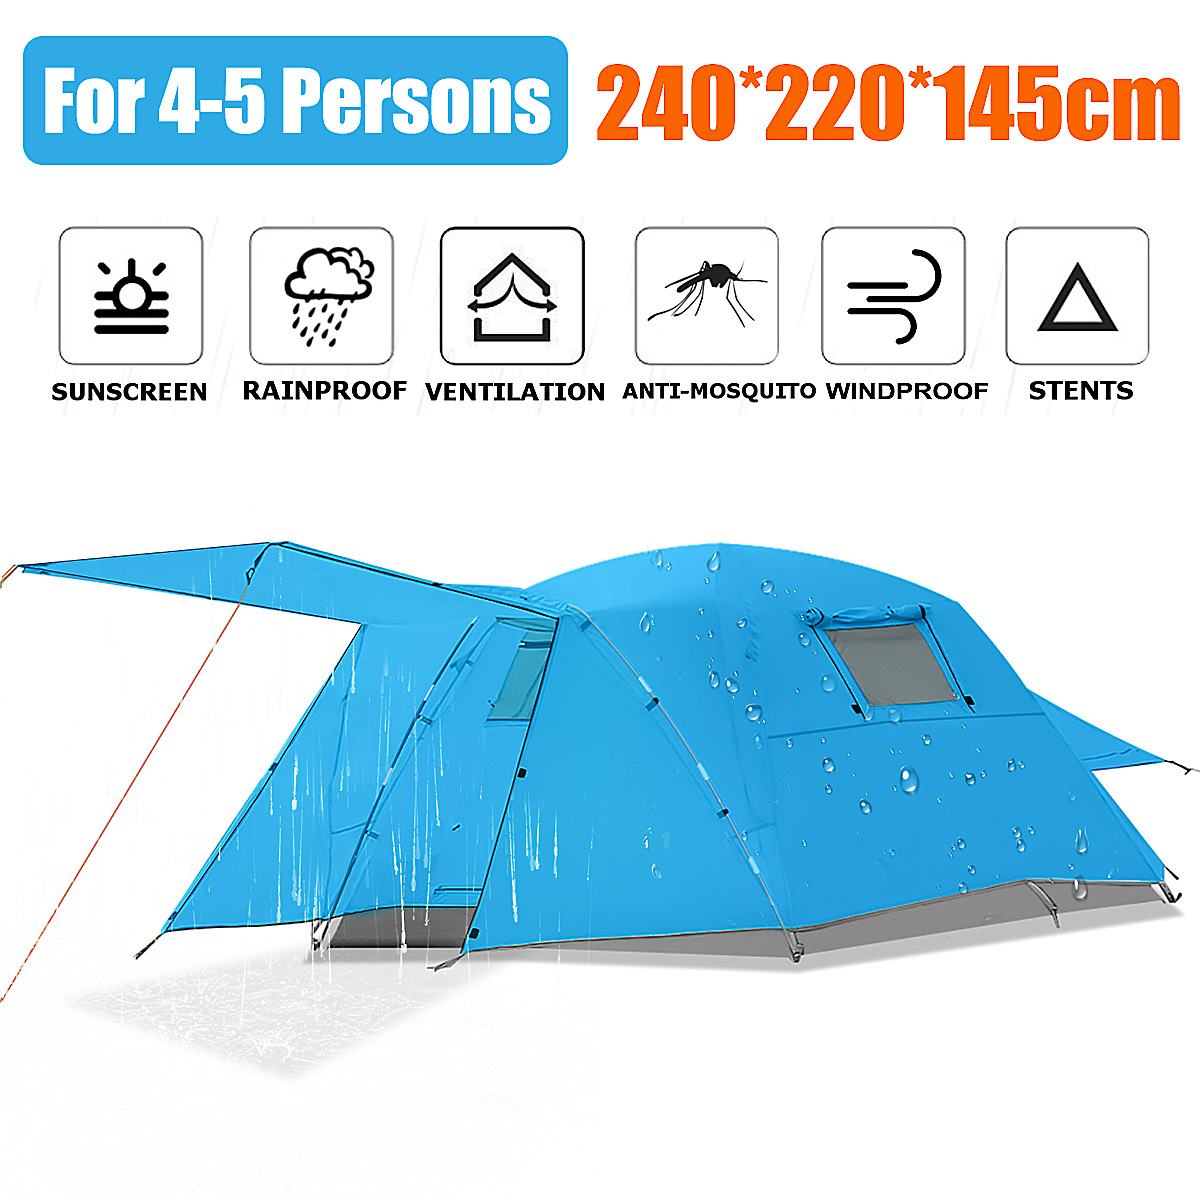 4 Person Instant Setup Waterproof Tent, Rainfly, & Carry Bag